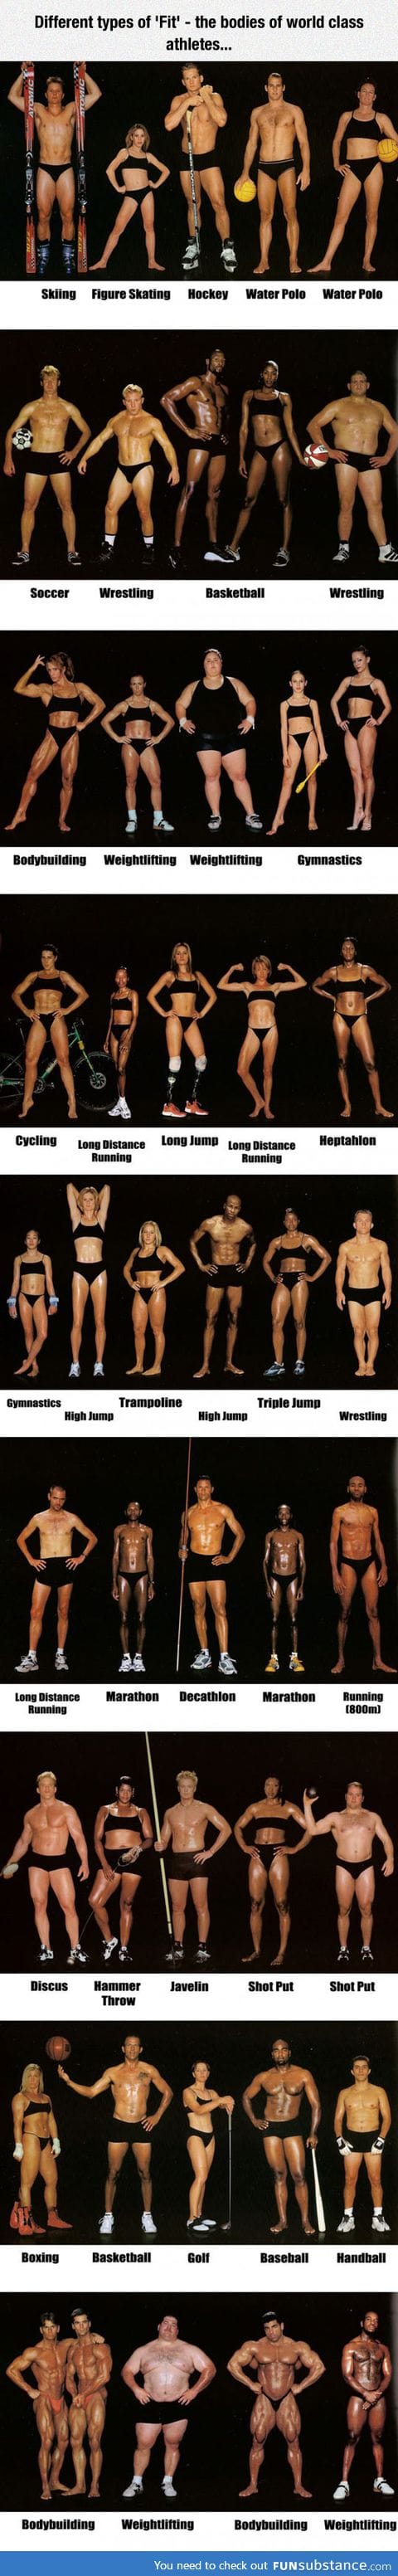 The shape of your body depends on the sport you do